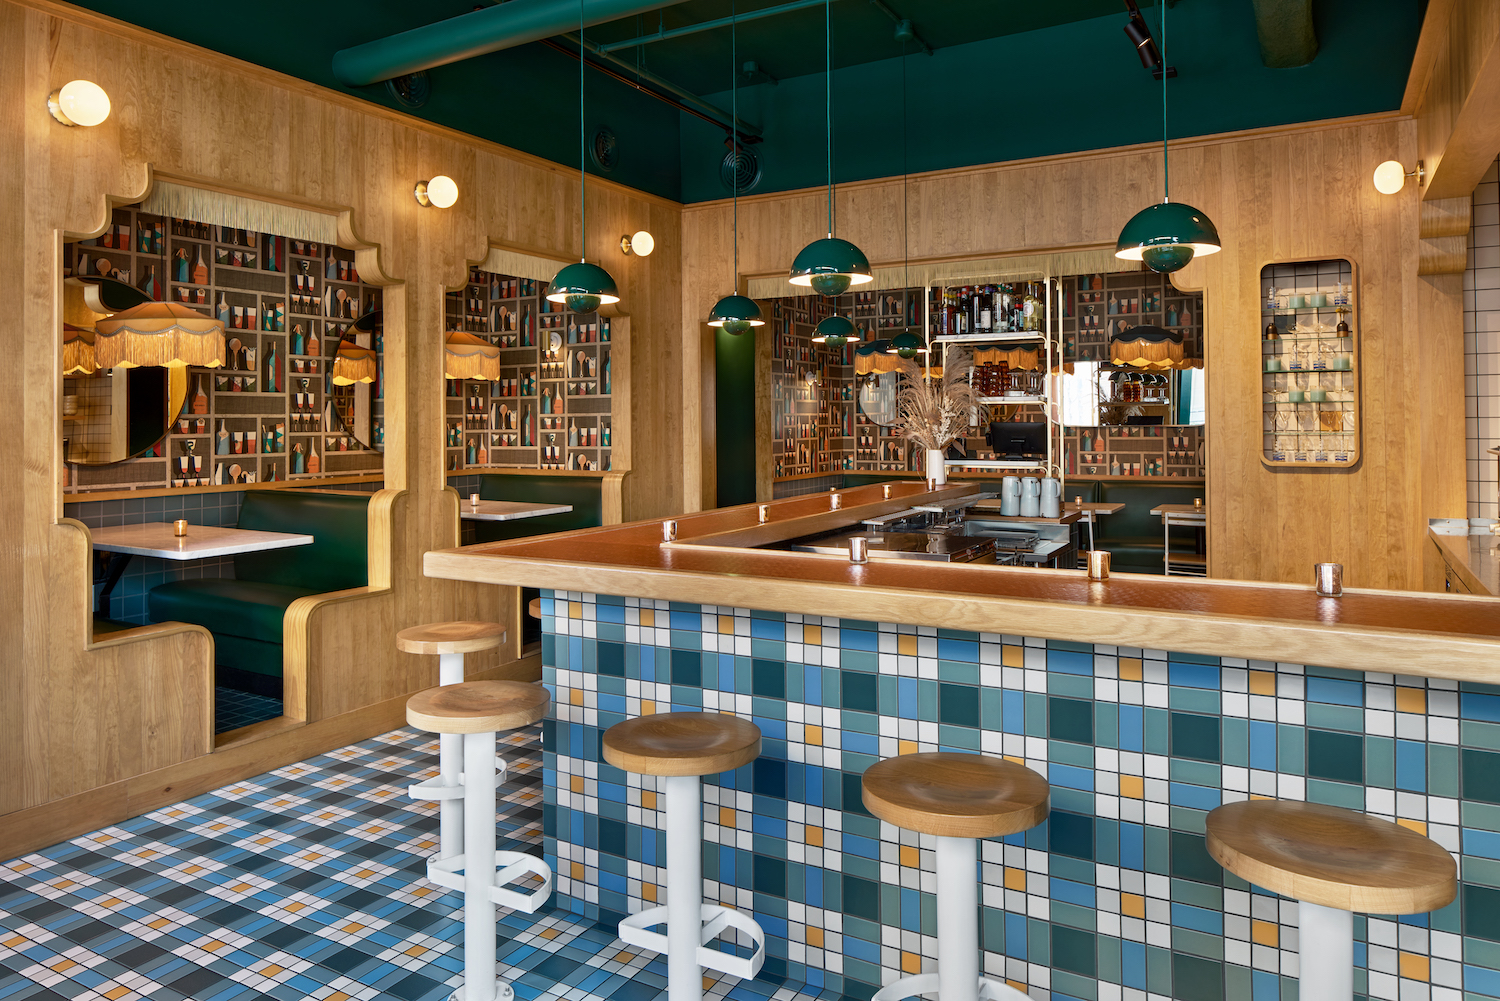 Indoor dining area with a bar and in-the-wall booth seats. There's blue-and-white-checkered floor patterns and cocktail glass wallpaper